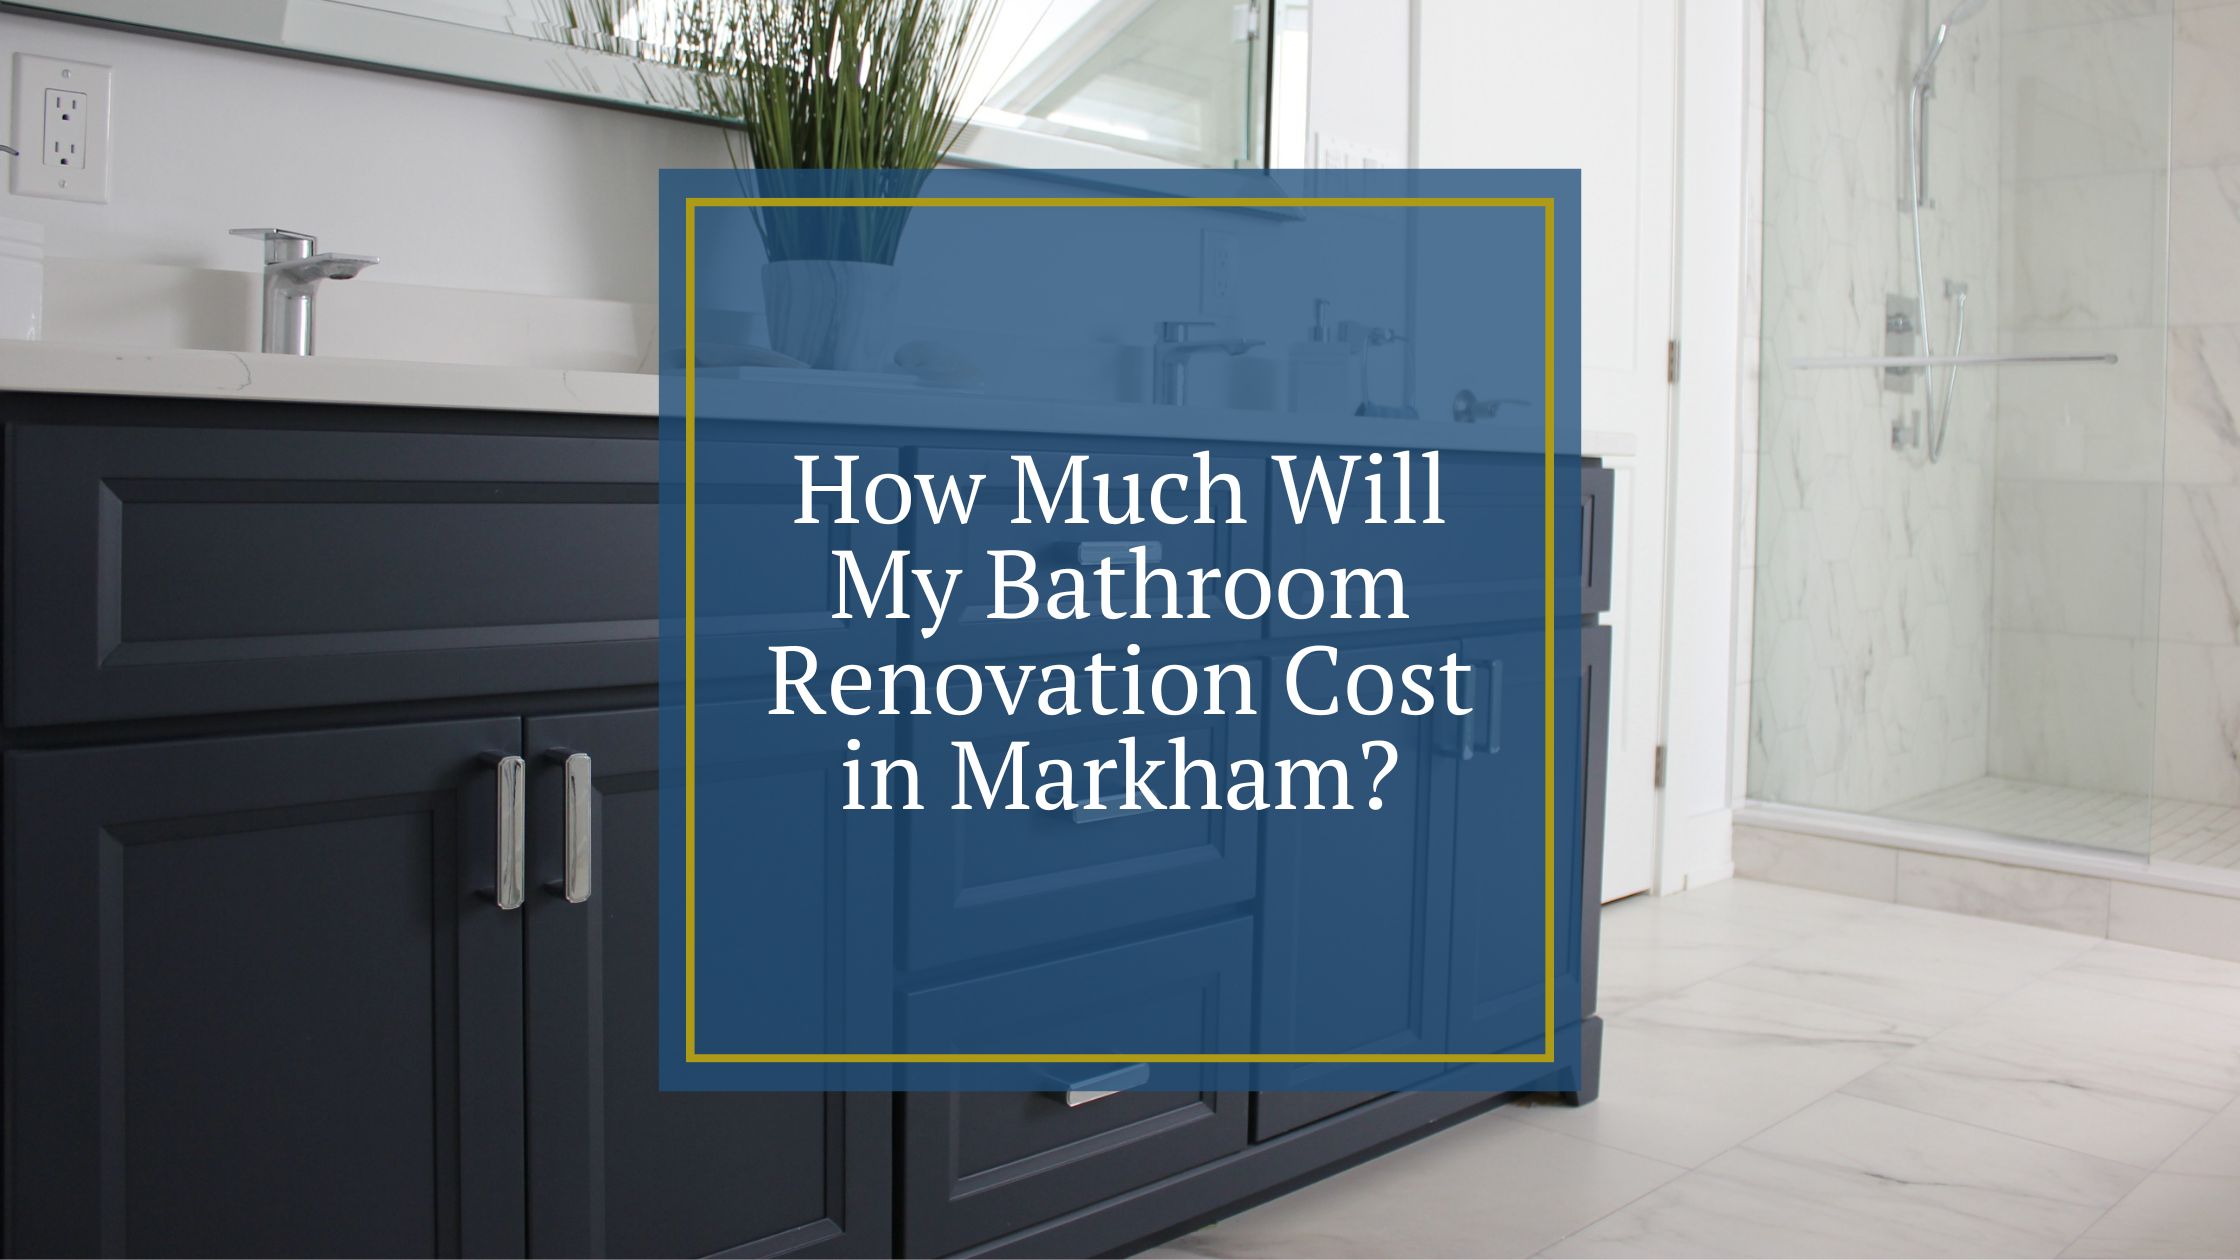 How Much Will My Bathroom Renovation Cost in Markham?